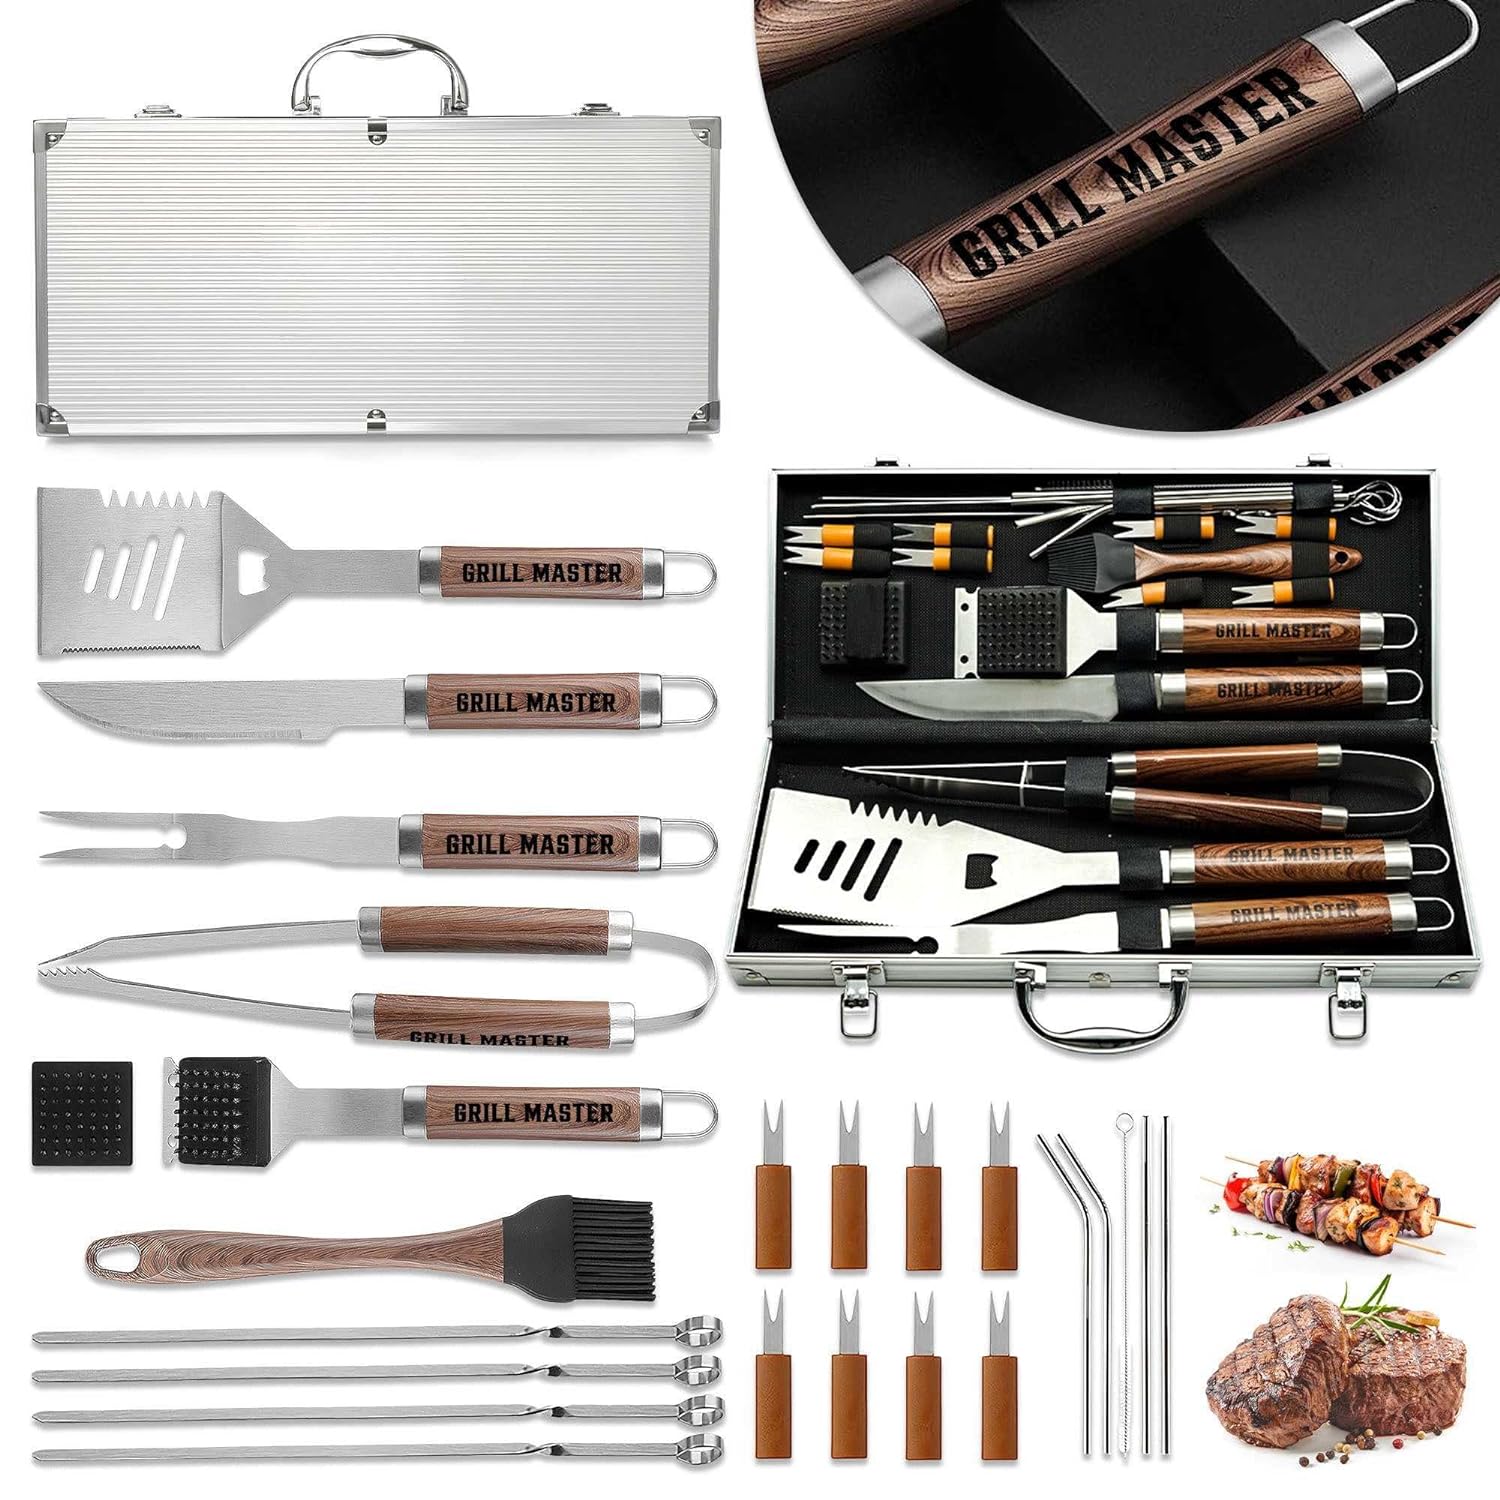 Macorner 25pcs Stainless Steel BBQ Grill Tool Set for Men - Grilling Accessories for Outdoor - Gift for Birthday Father's Day Christmas for Men Dad Grandpa Papa - Barbecue Tool Kit with Aluminum Case